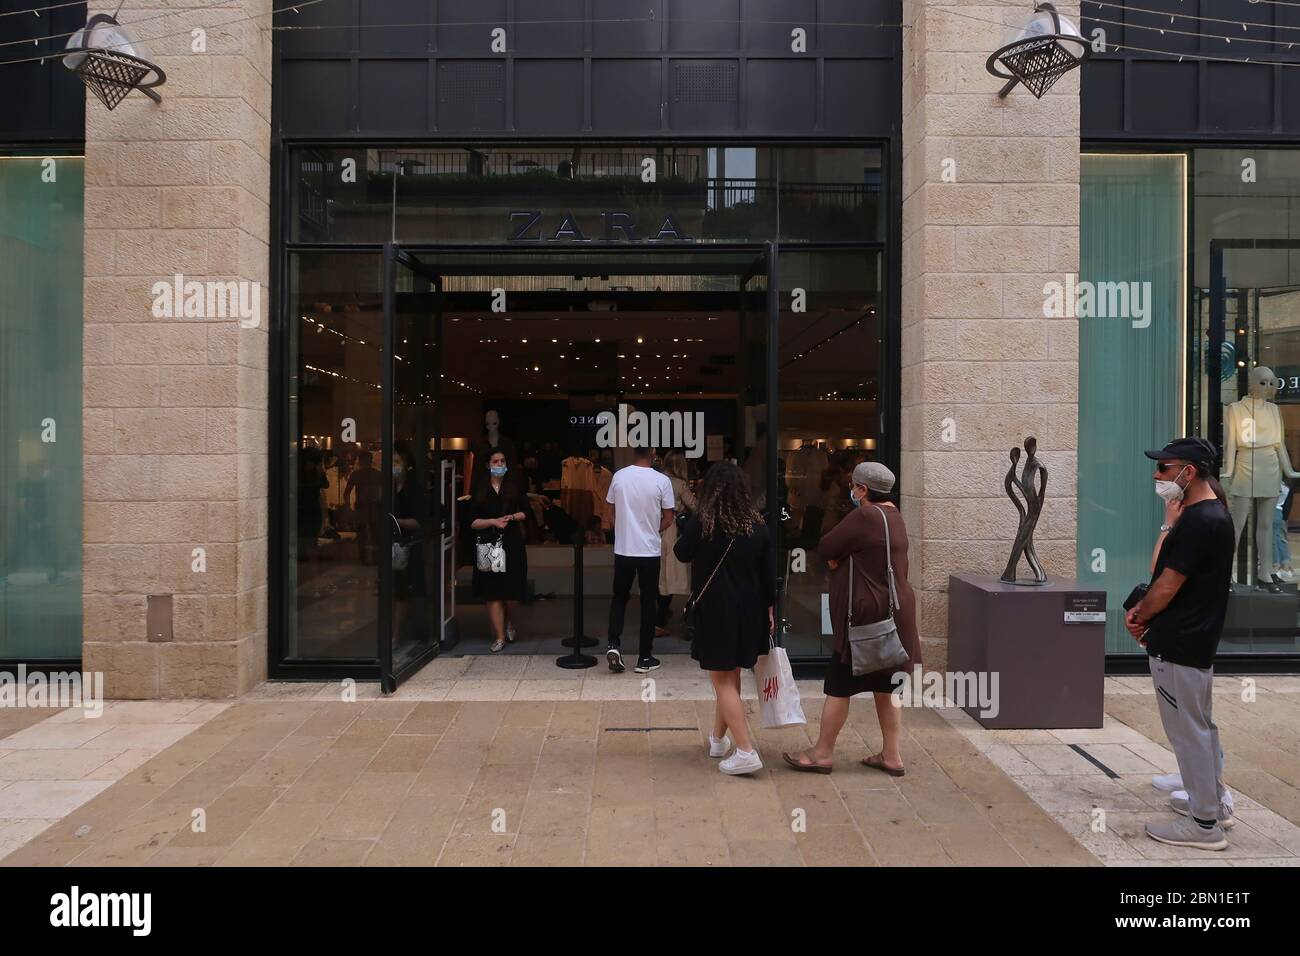 Israelis entering Zara clothing store as Israel eases Coronavirus  restrictions in Mamilla Mall, also known as Alrov Mamilla Avenue a shopping  street and the only open-air mall near the old city in